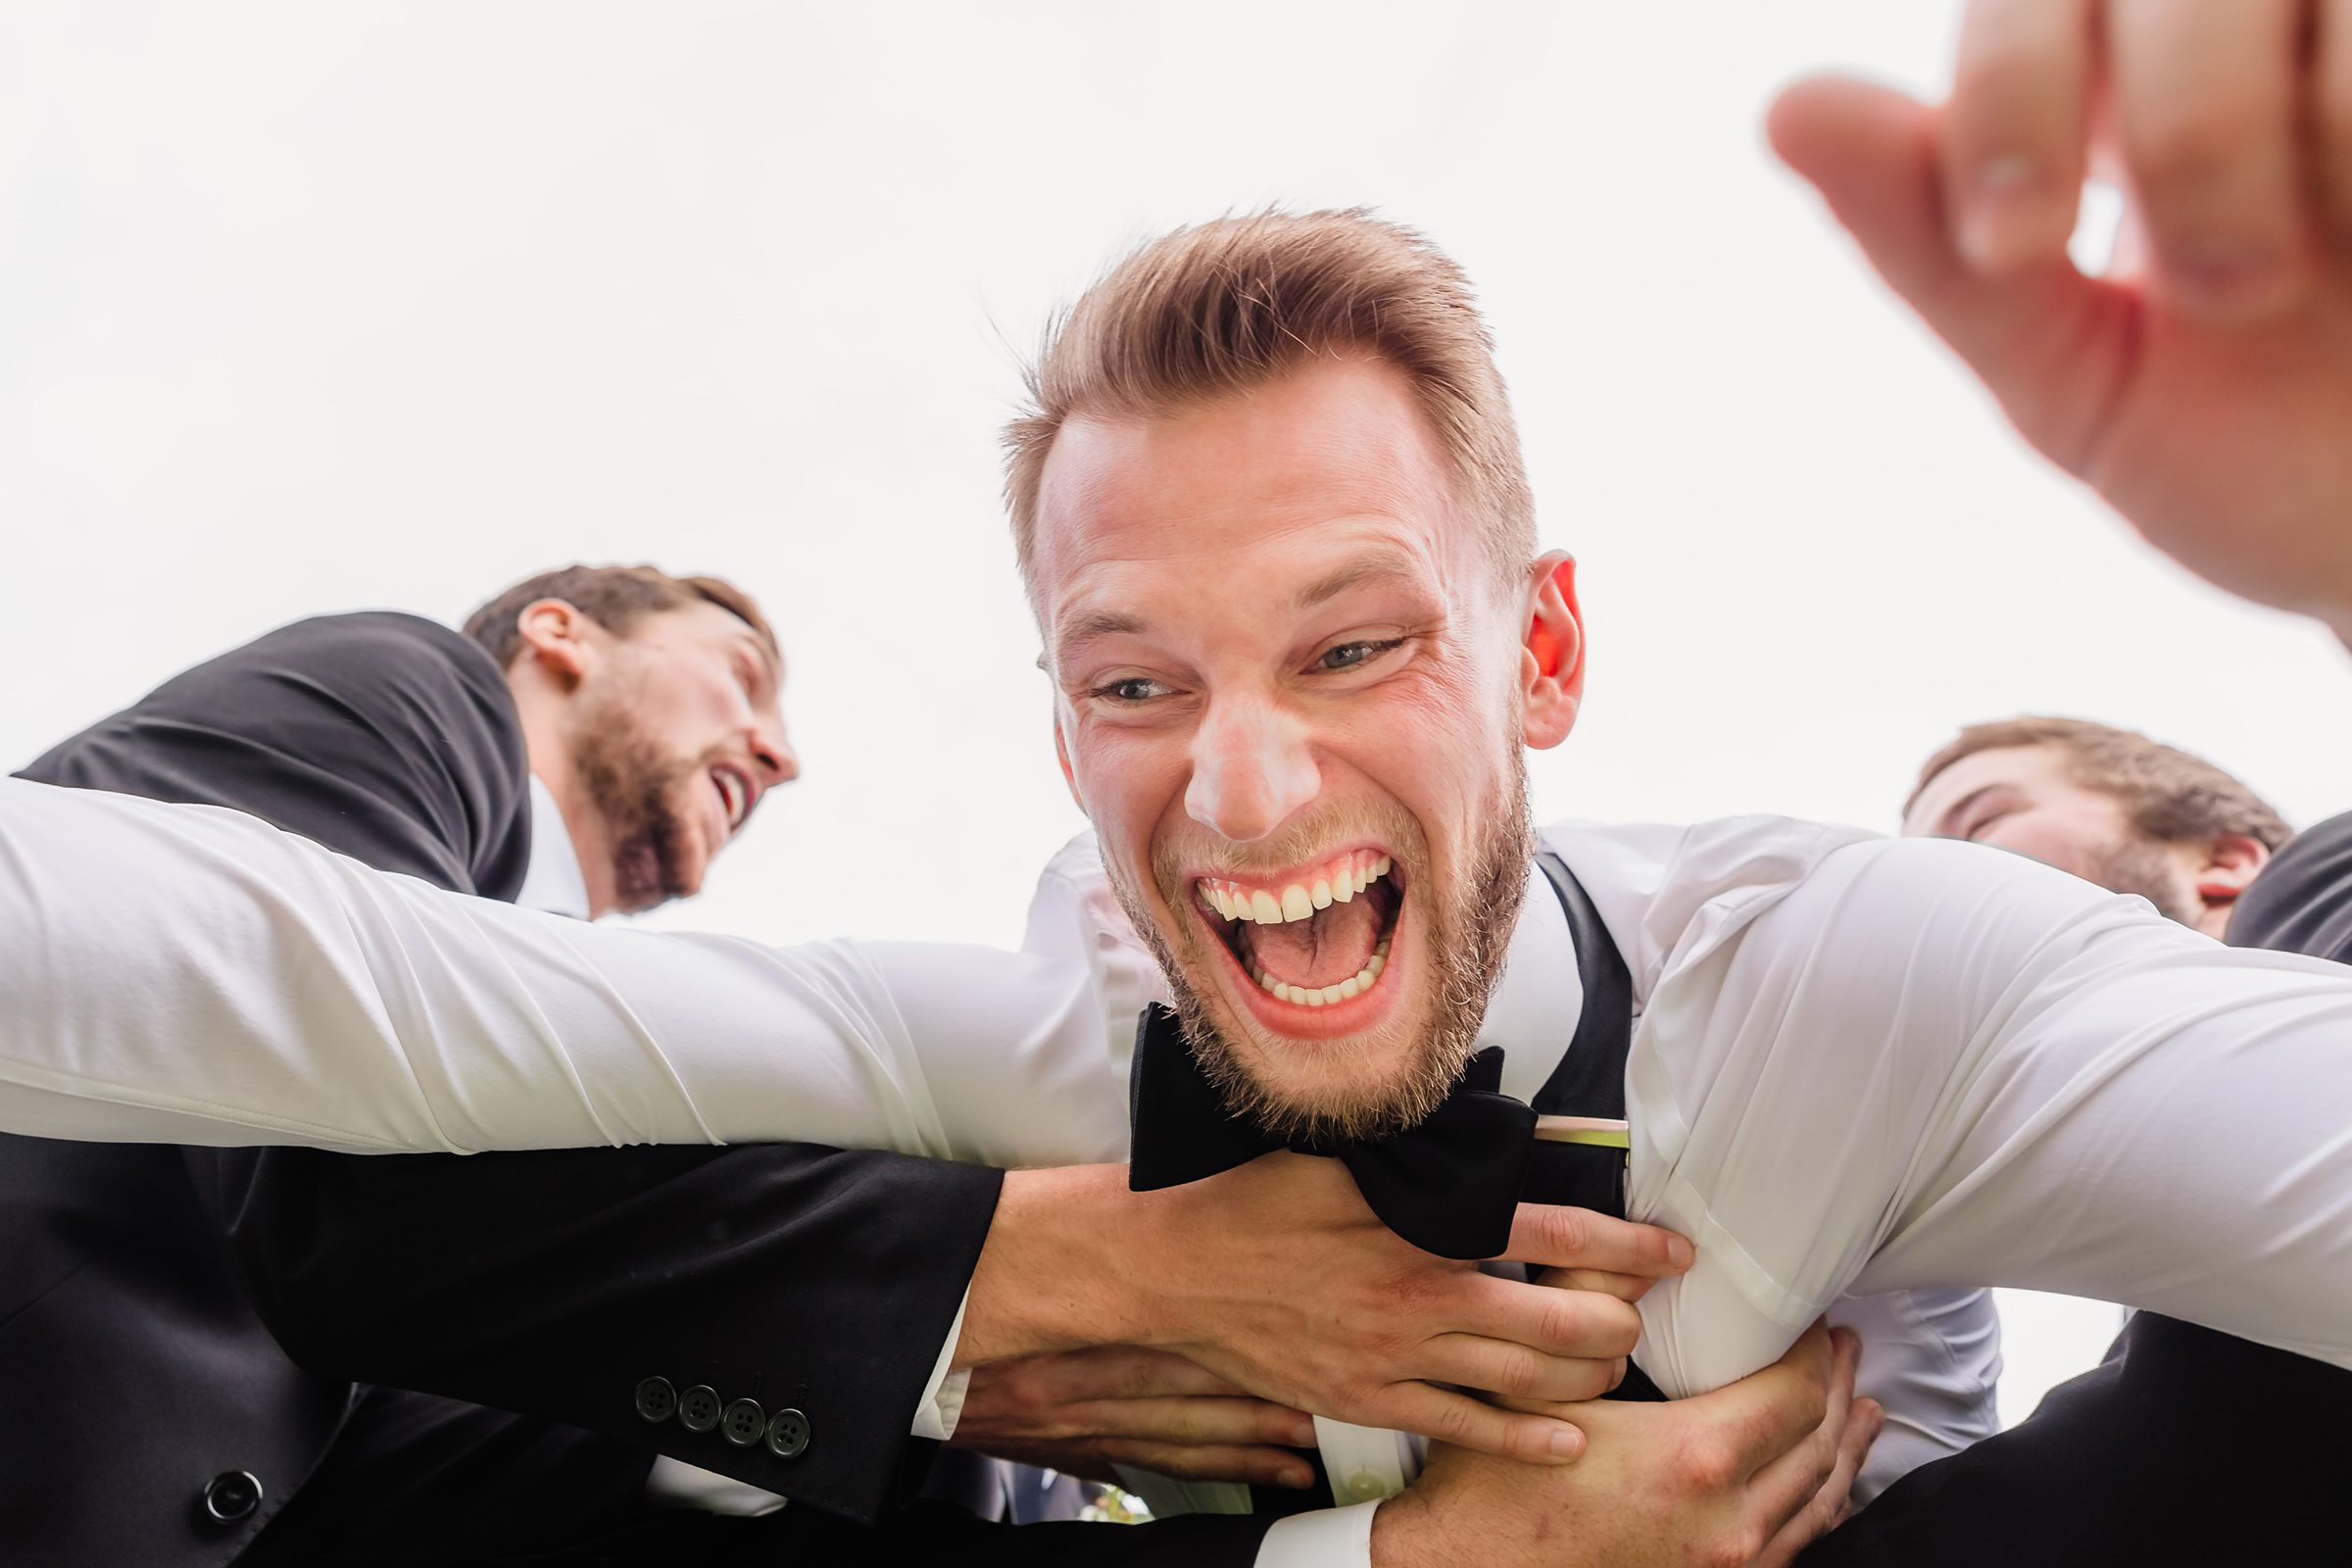 Groomsmen catch the groom during his wedding at the Chevy Chase Country Club in Wheeling, Illinois.